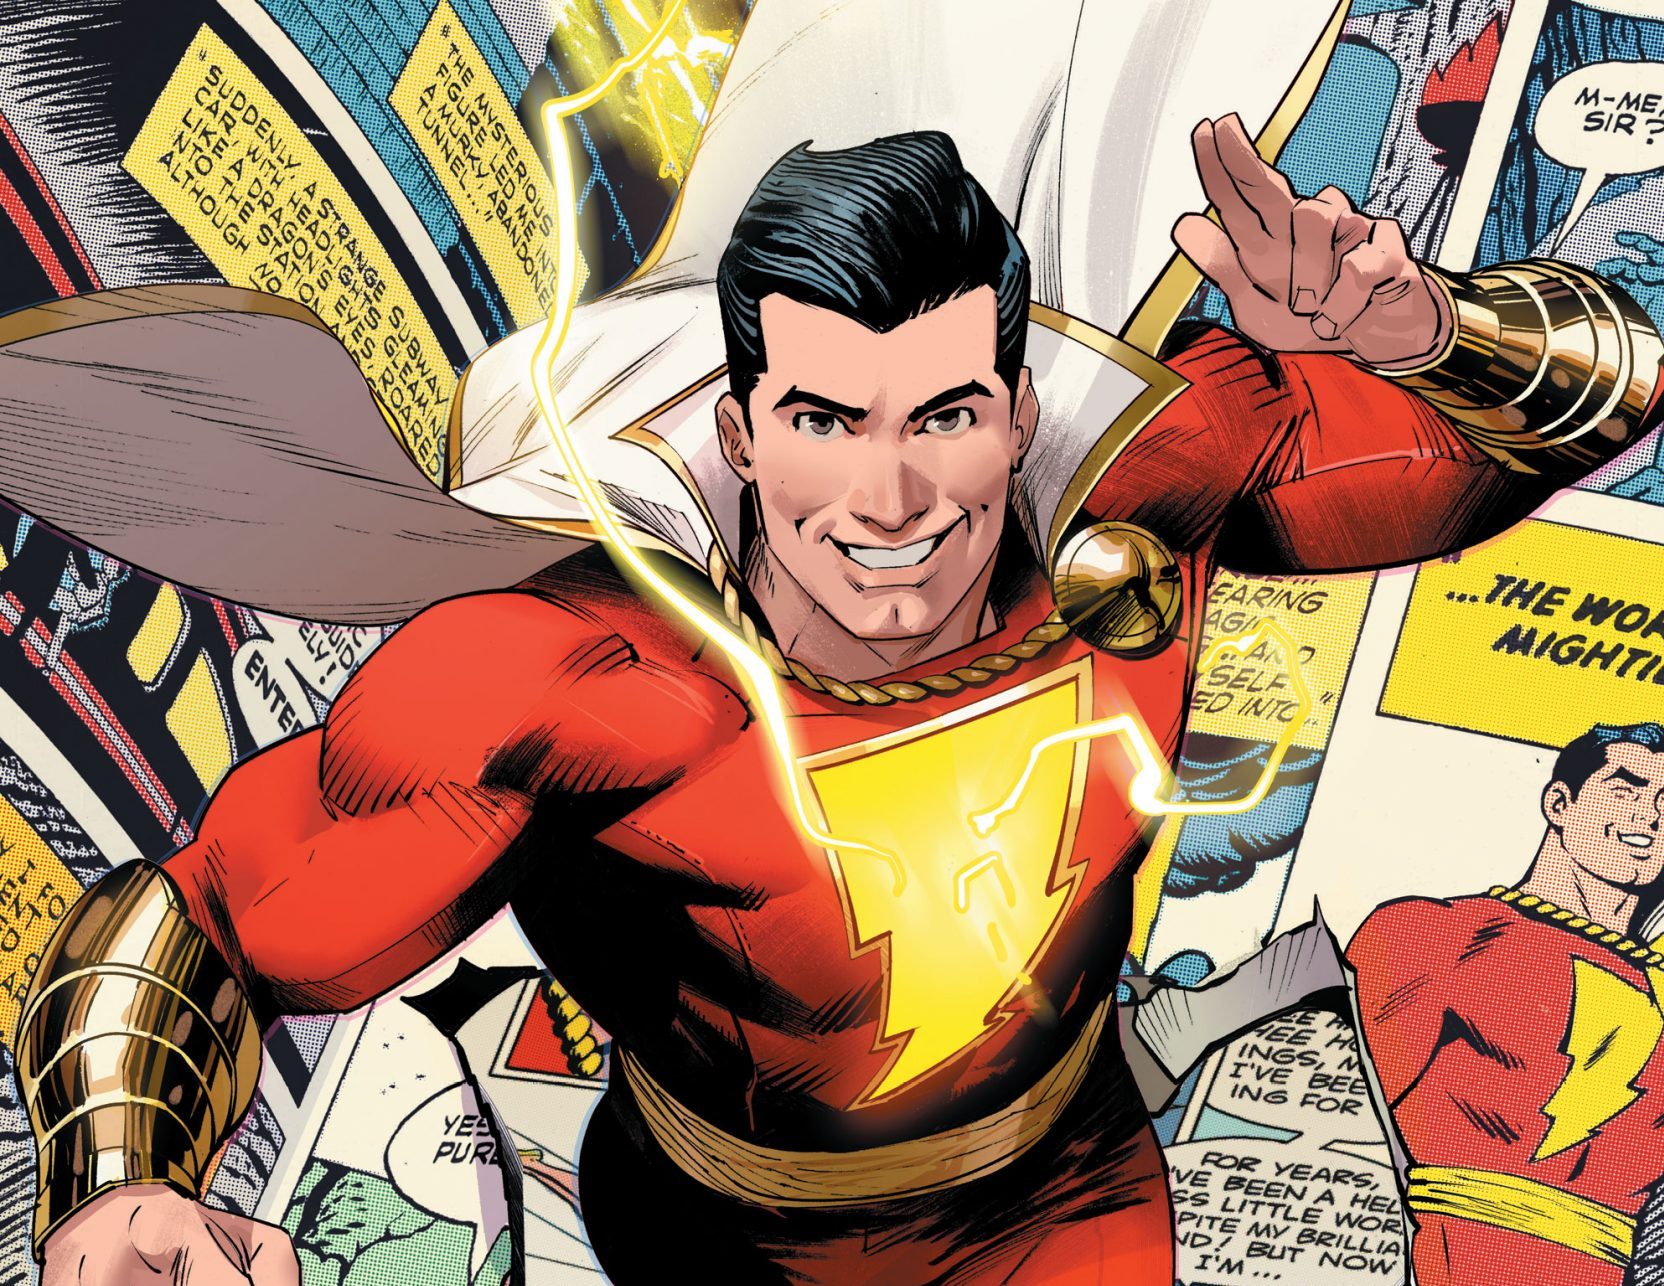 'Shazam!' #1 brings the magic in this stunning debut